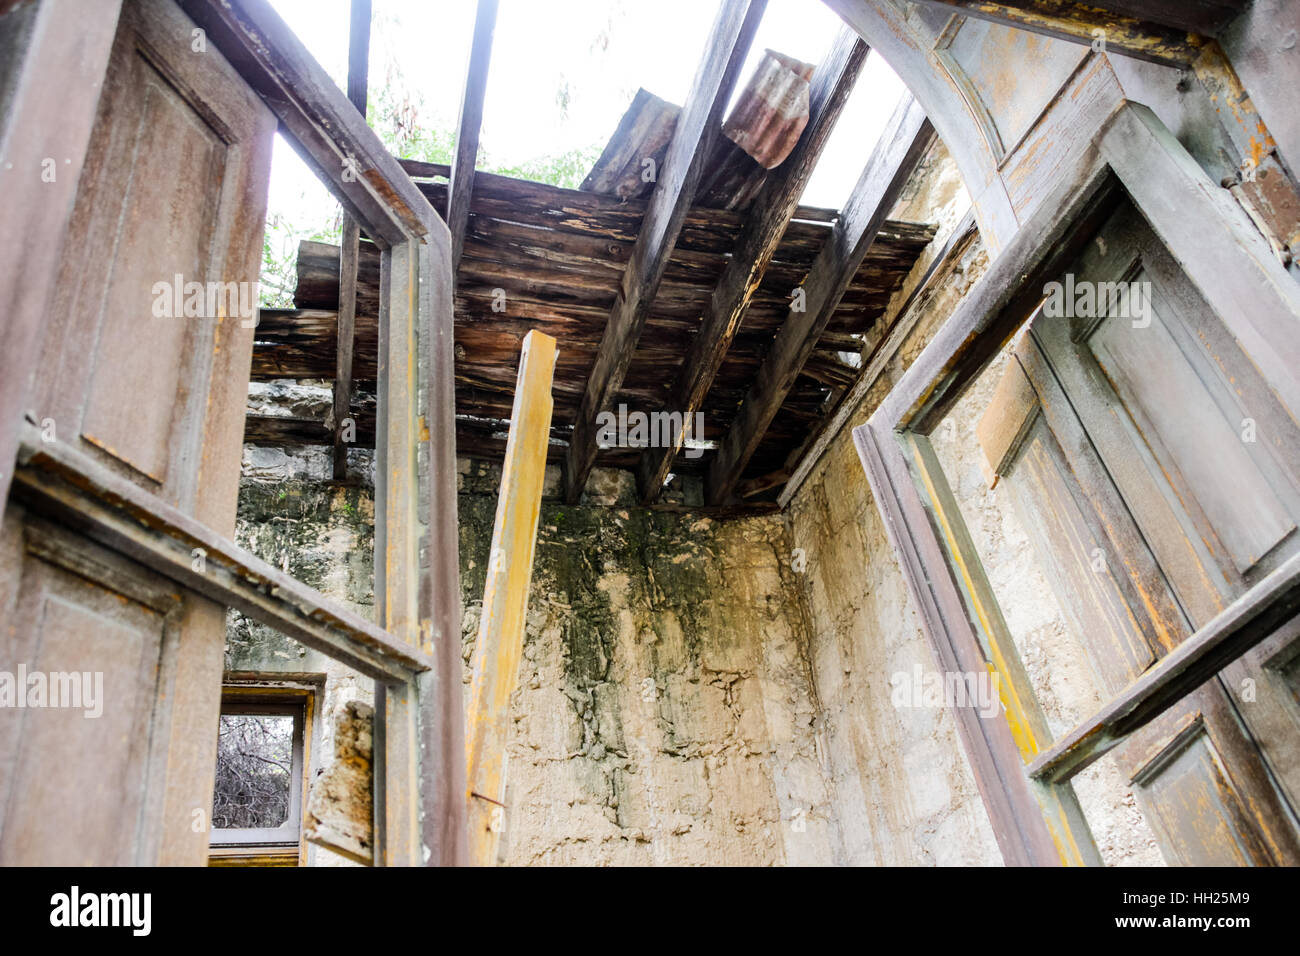 Photograph of an old wood roof Stock Photo